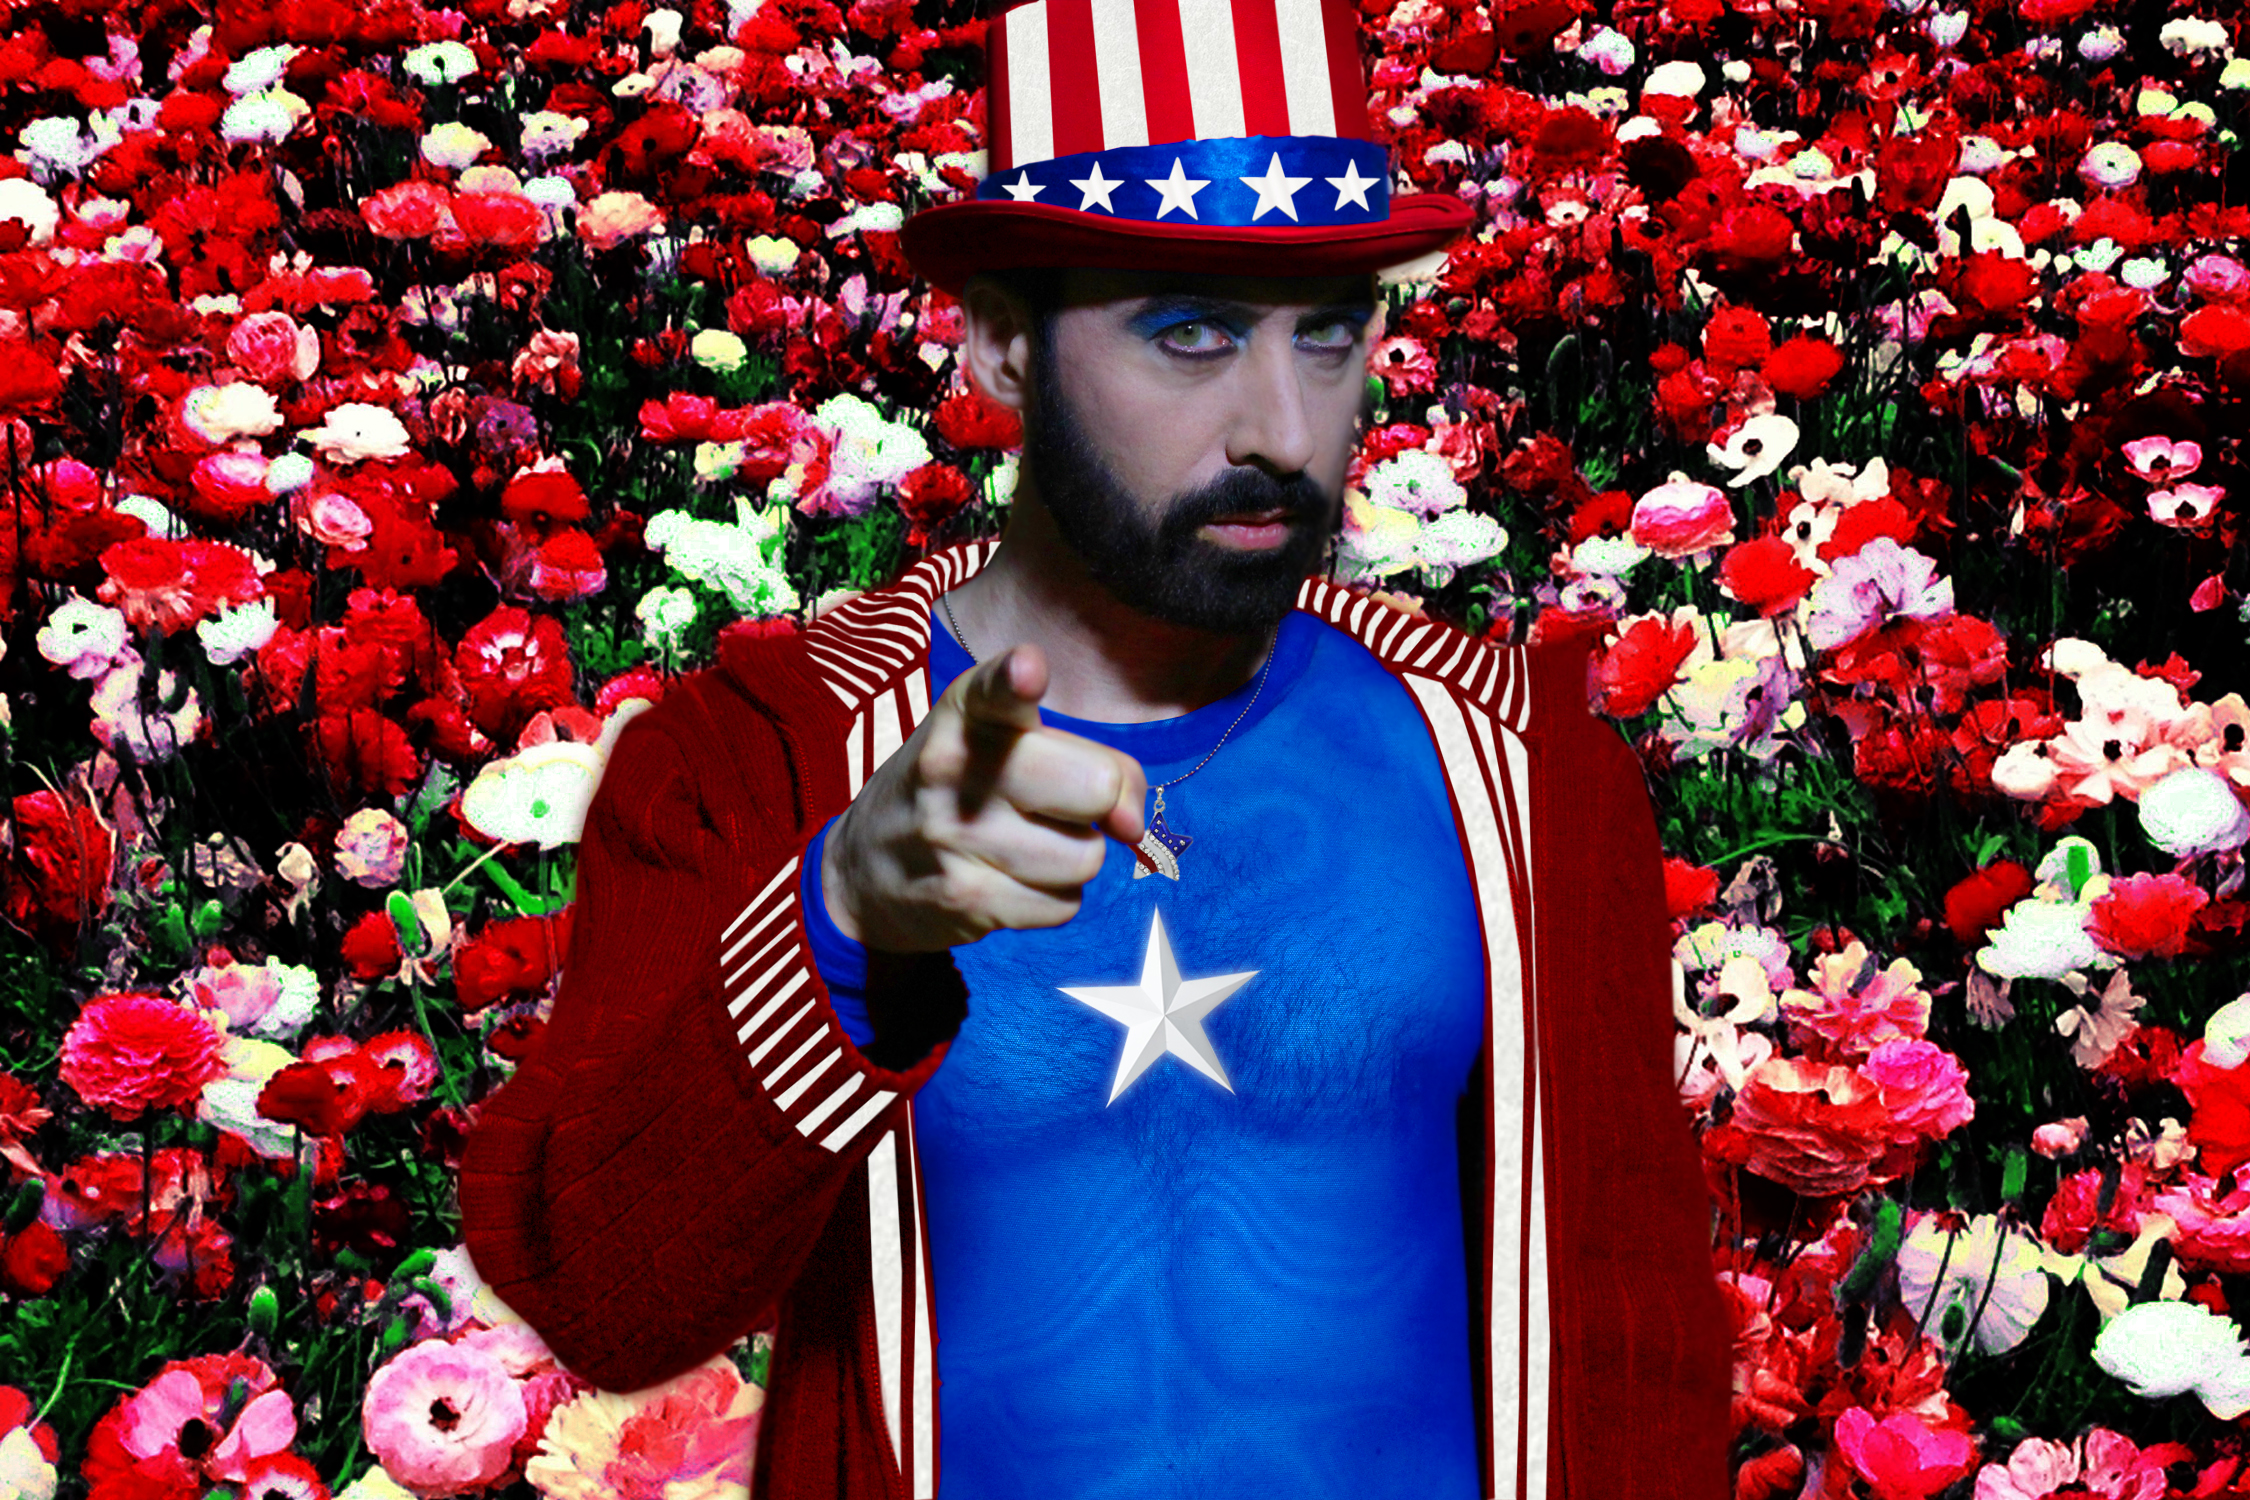 Yes I am a Canadian citizen but I can still dress up and support my US neighbors, time to celebrate! #Happy4thofJuly #IndependenceDay #UncleSam #MoonDazeTV #RealityShow #Season03